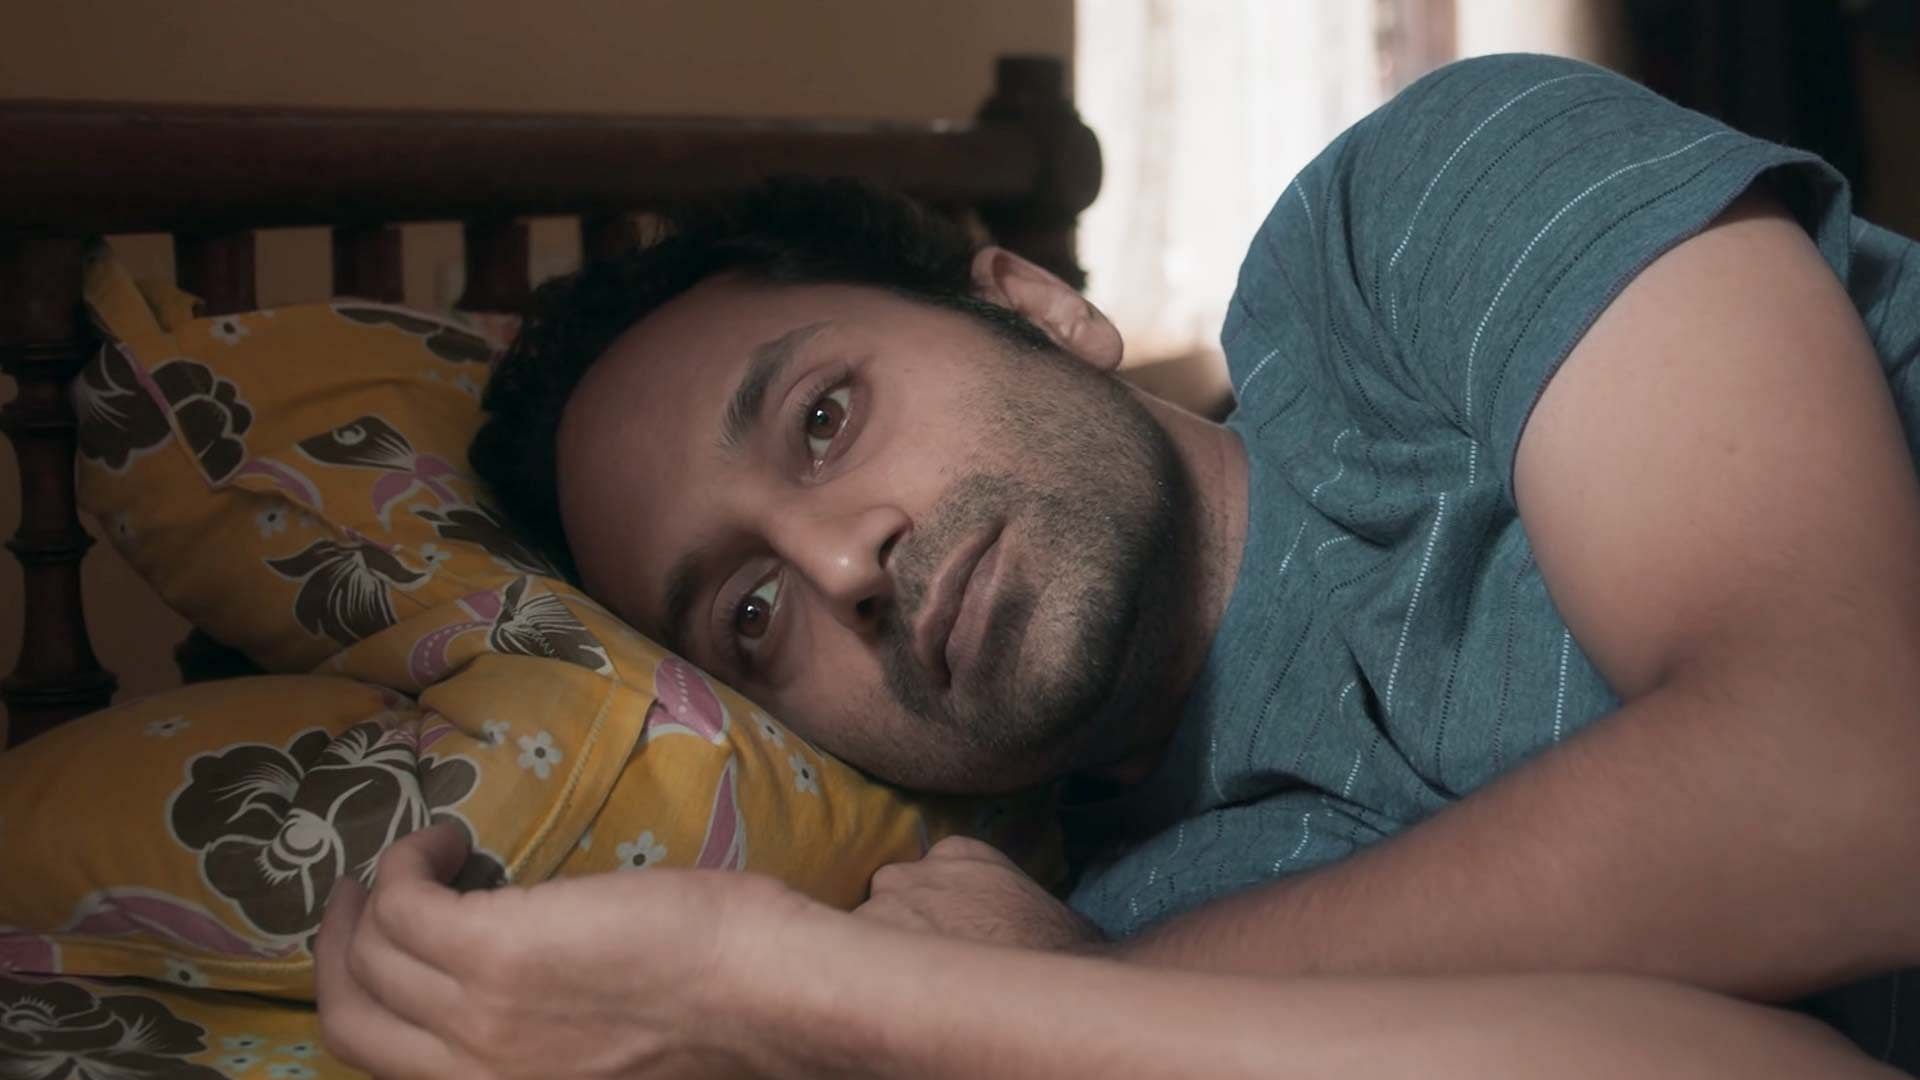 Fahadh Faasil in ‘Joji’. The bloodlust of ‘Macbeth’ is not reflected in the film.